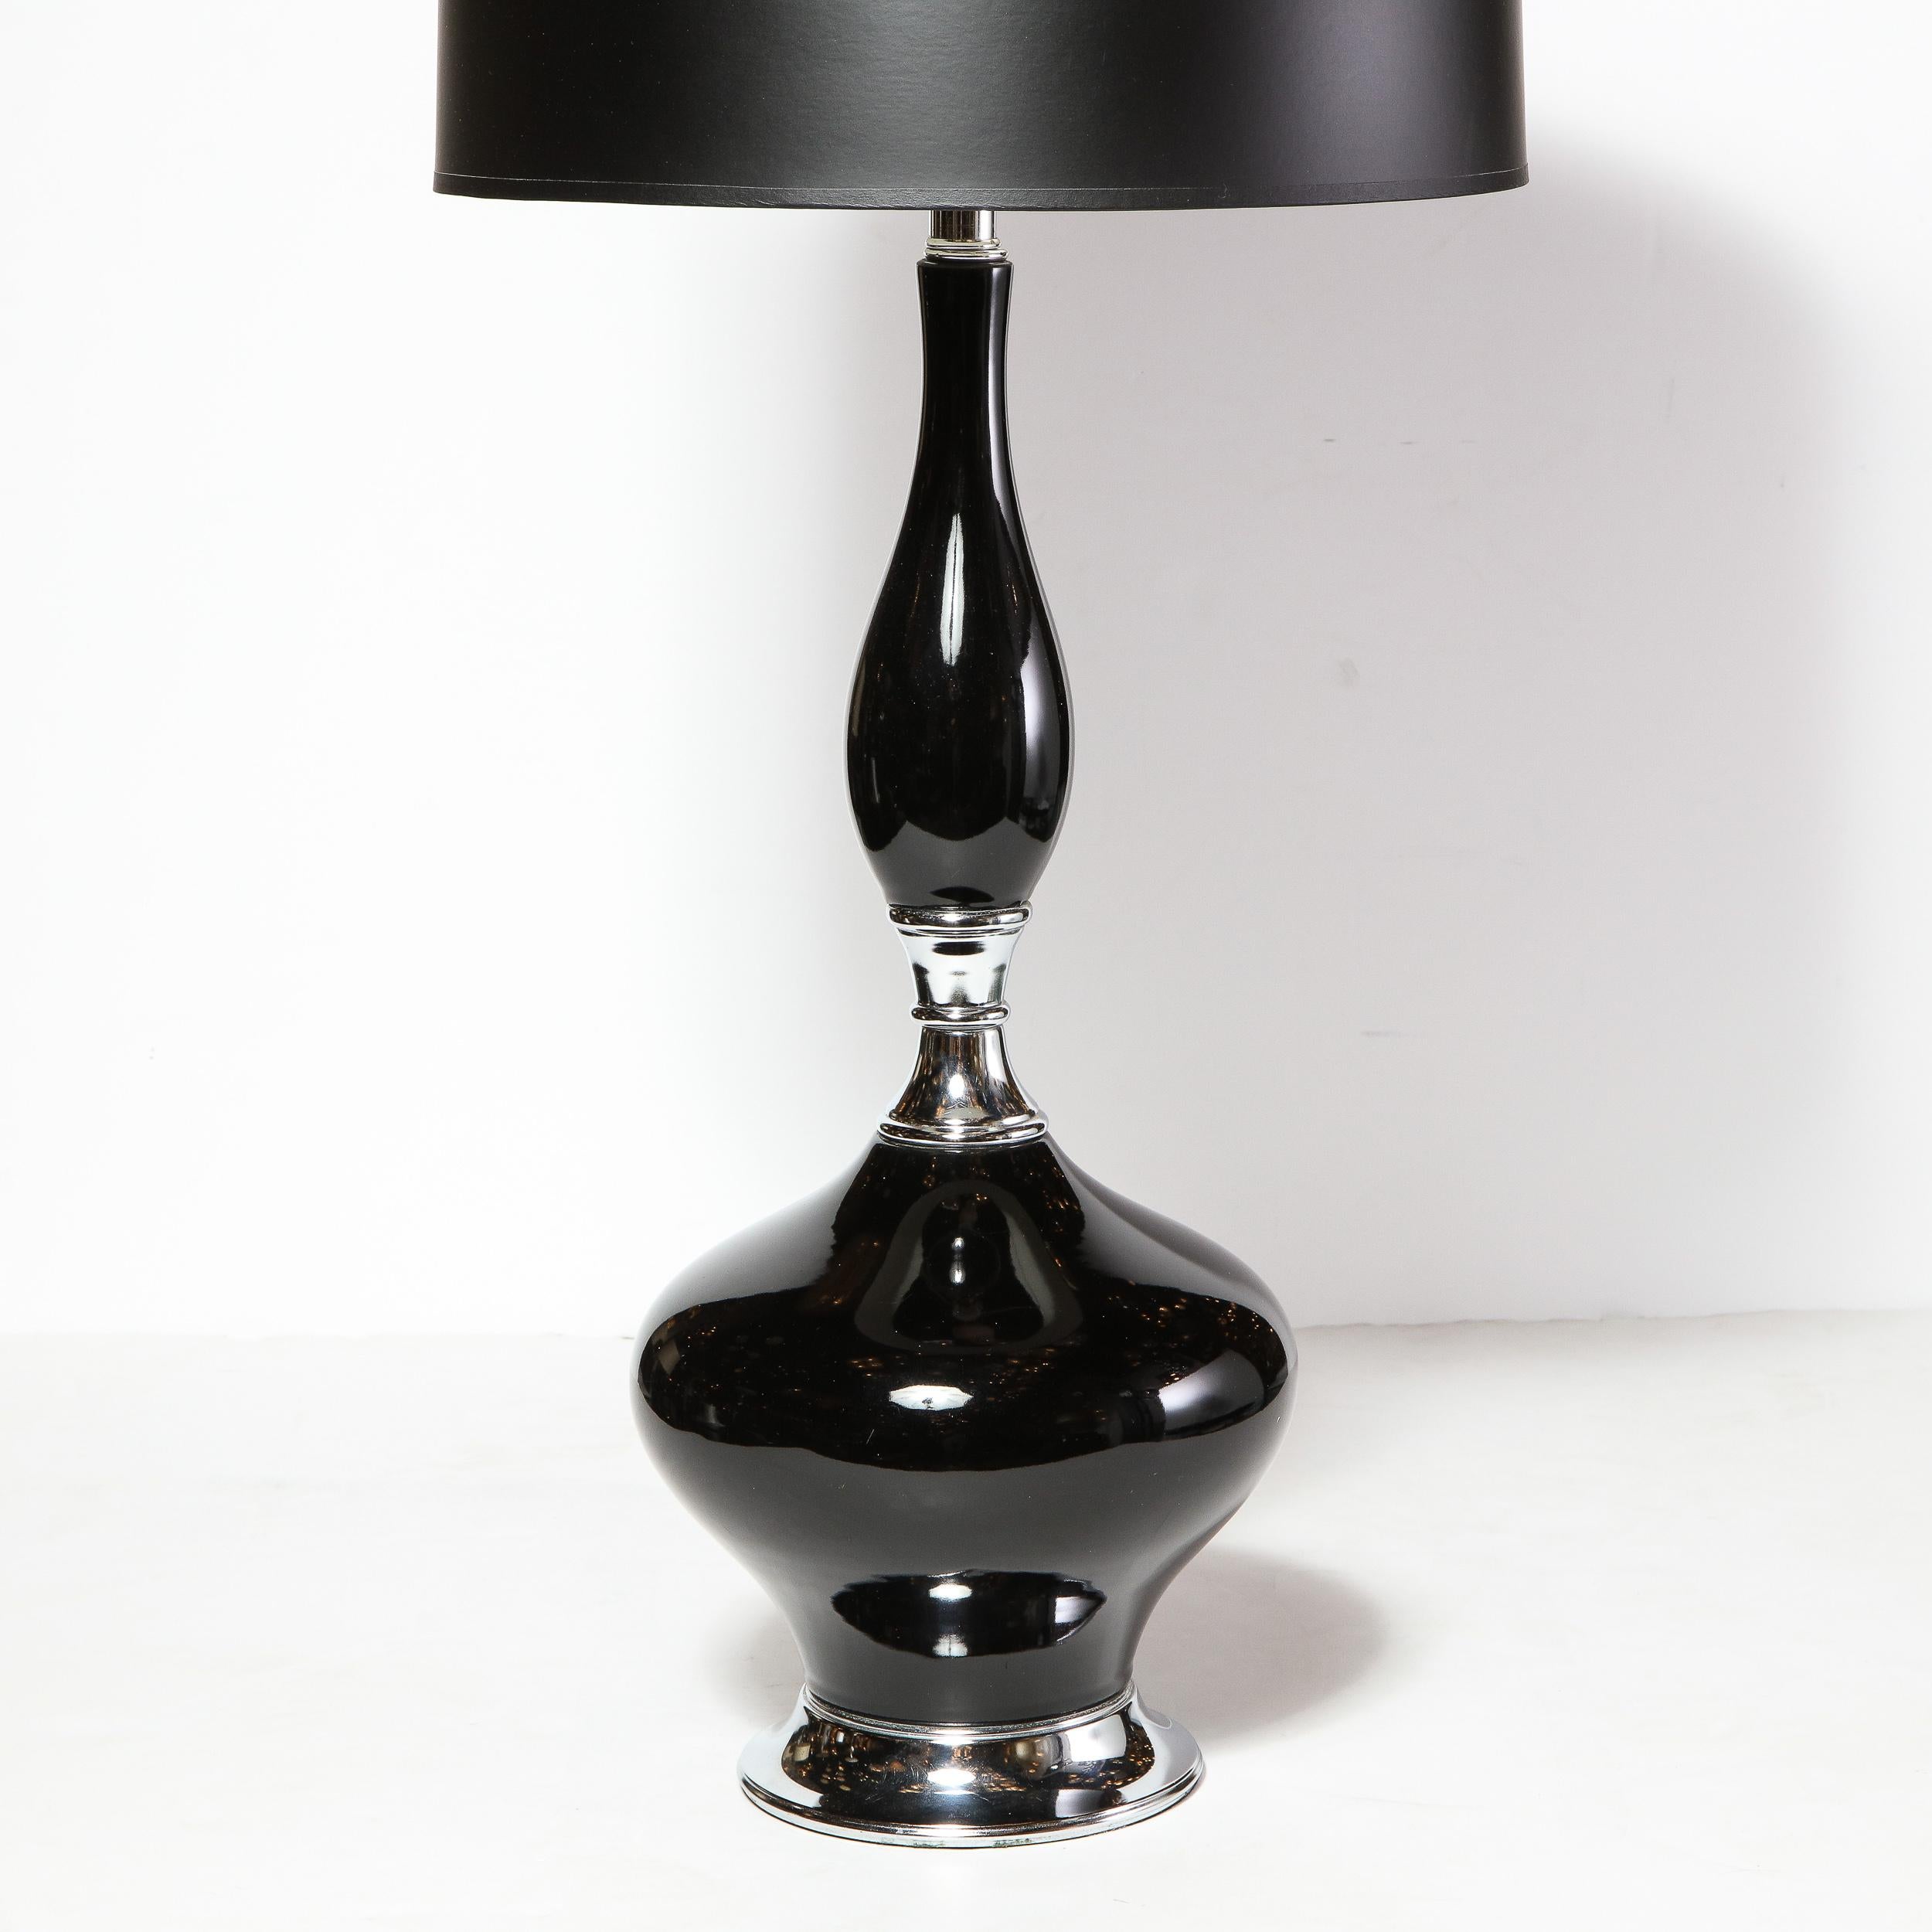 Mid-20th Century Pair of Mid-Century Modern Sculptural Black Glazed Ceramic Lamps w/ Chrome Bases For Sale